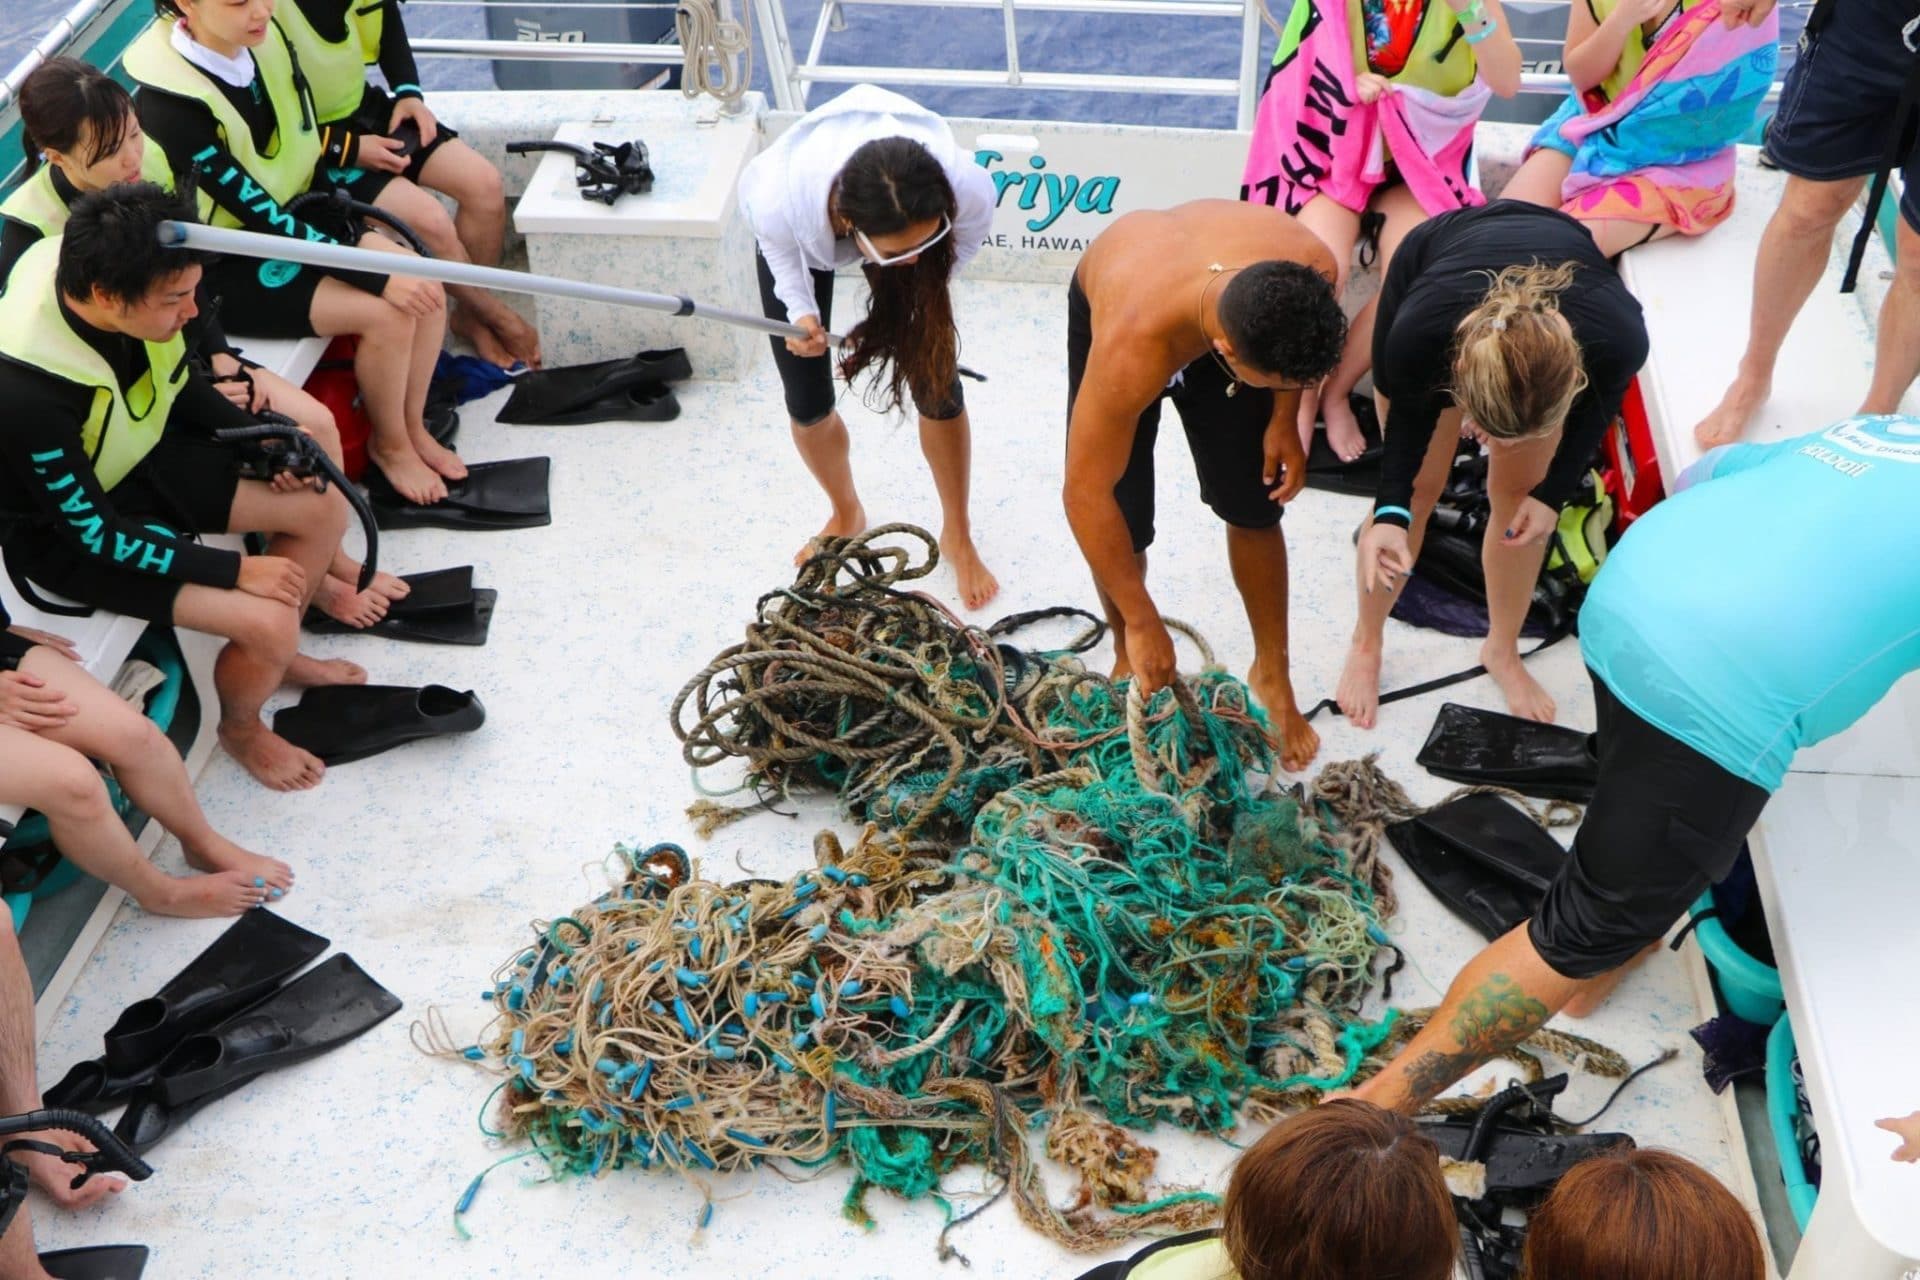 Dolphins and You crew removes trash from the ocean